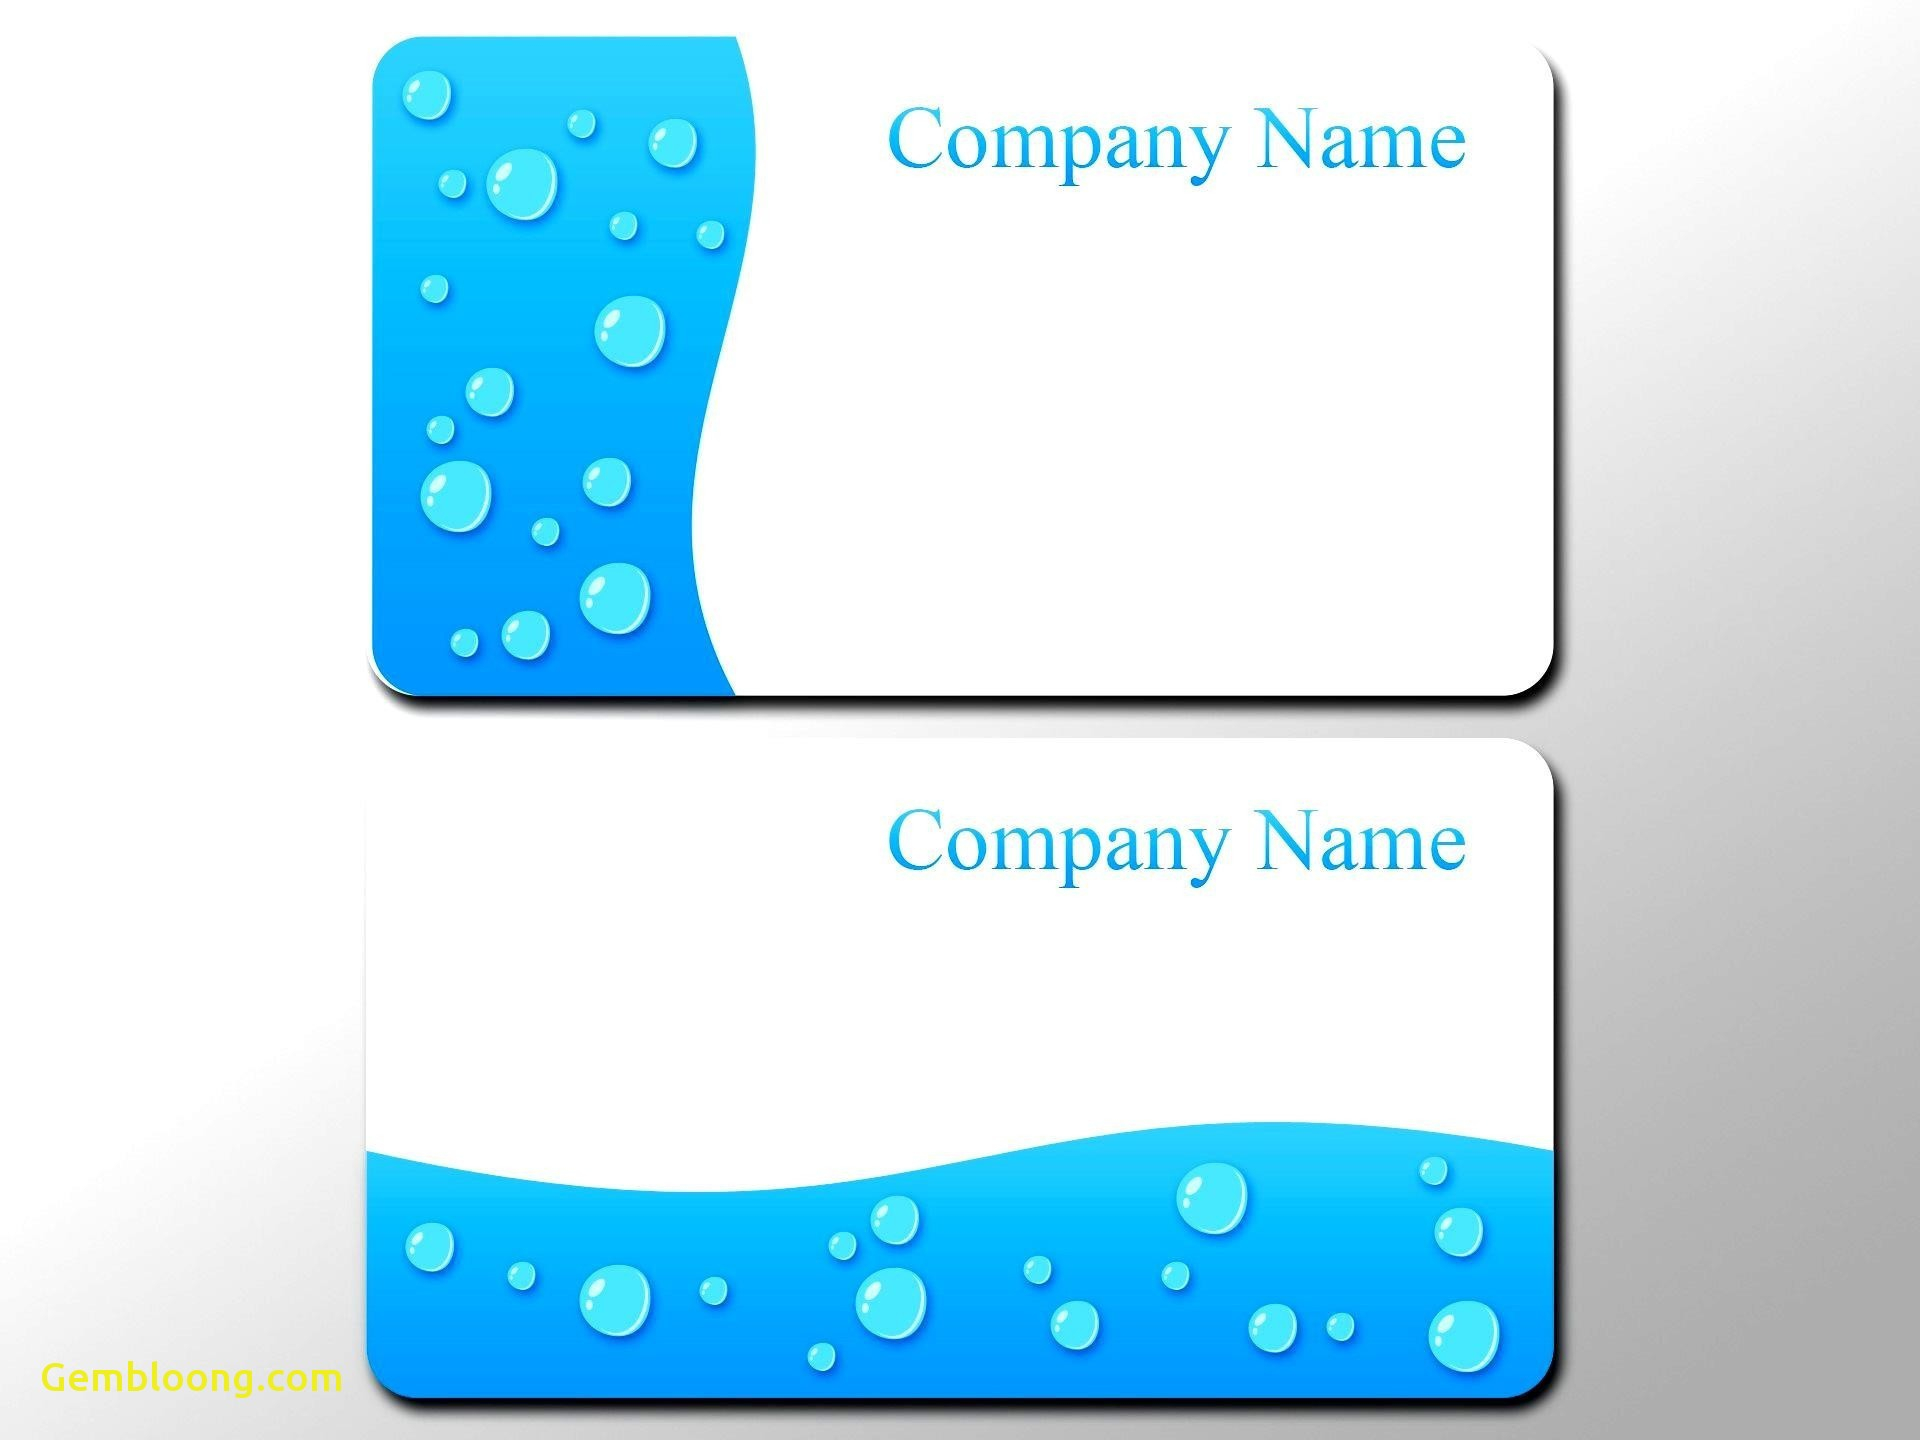 Business Card Photoshop Template Psd Awesome 016 Business For Blank Business Card Template Download